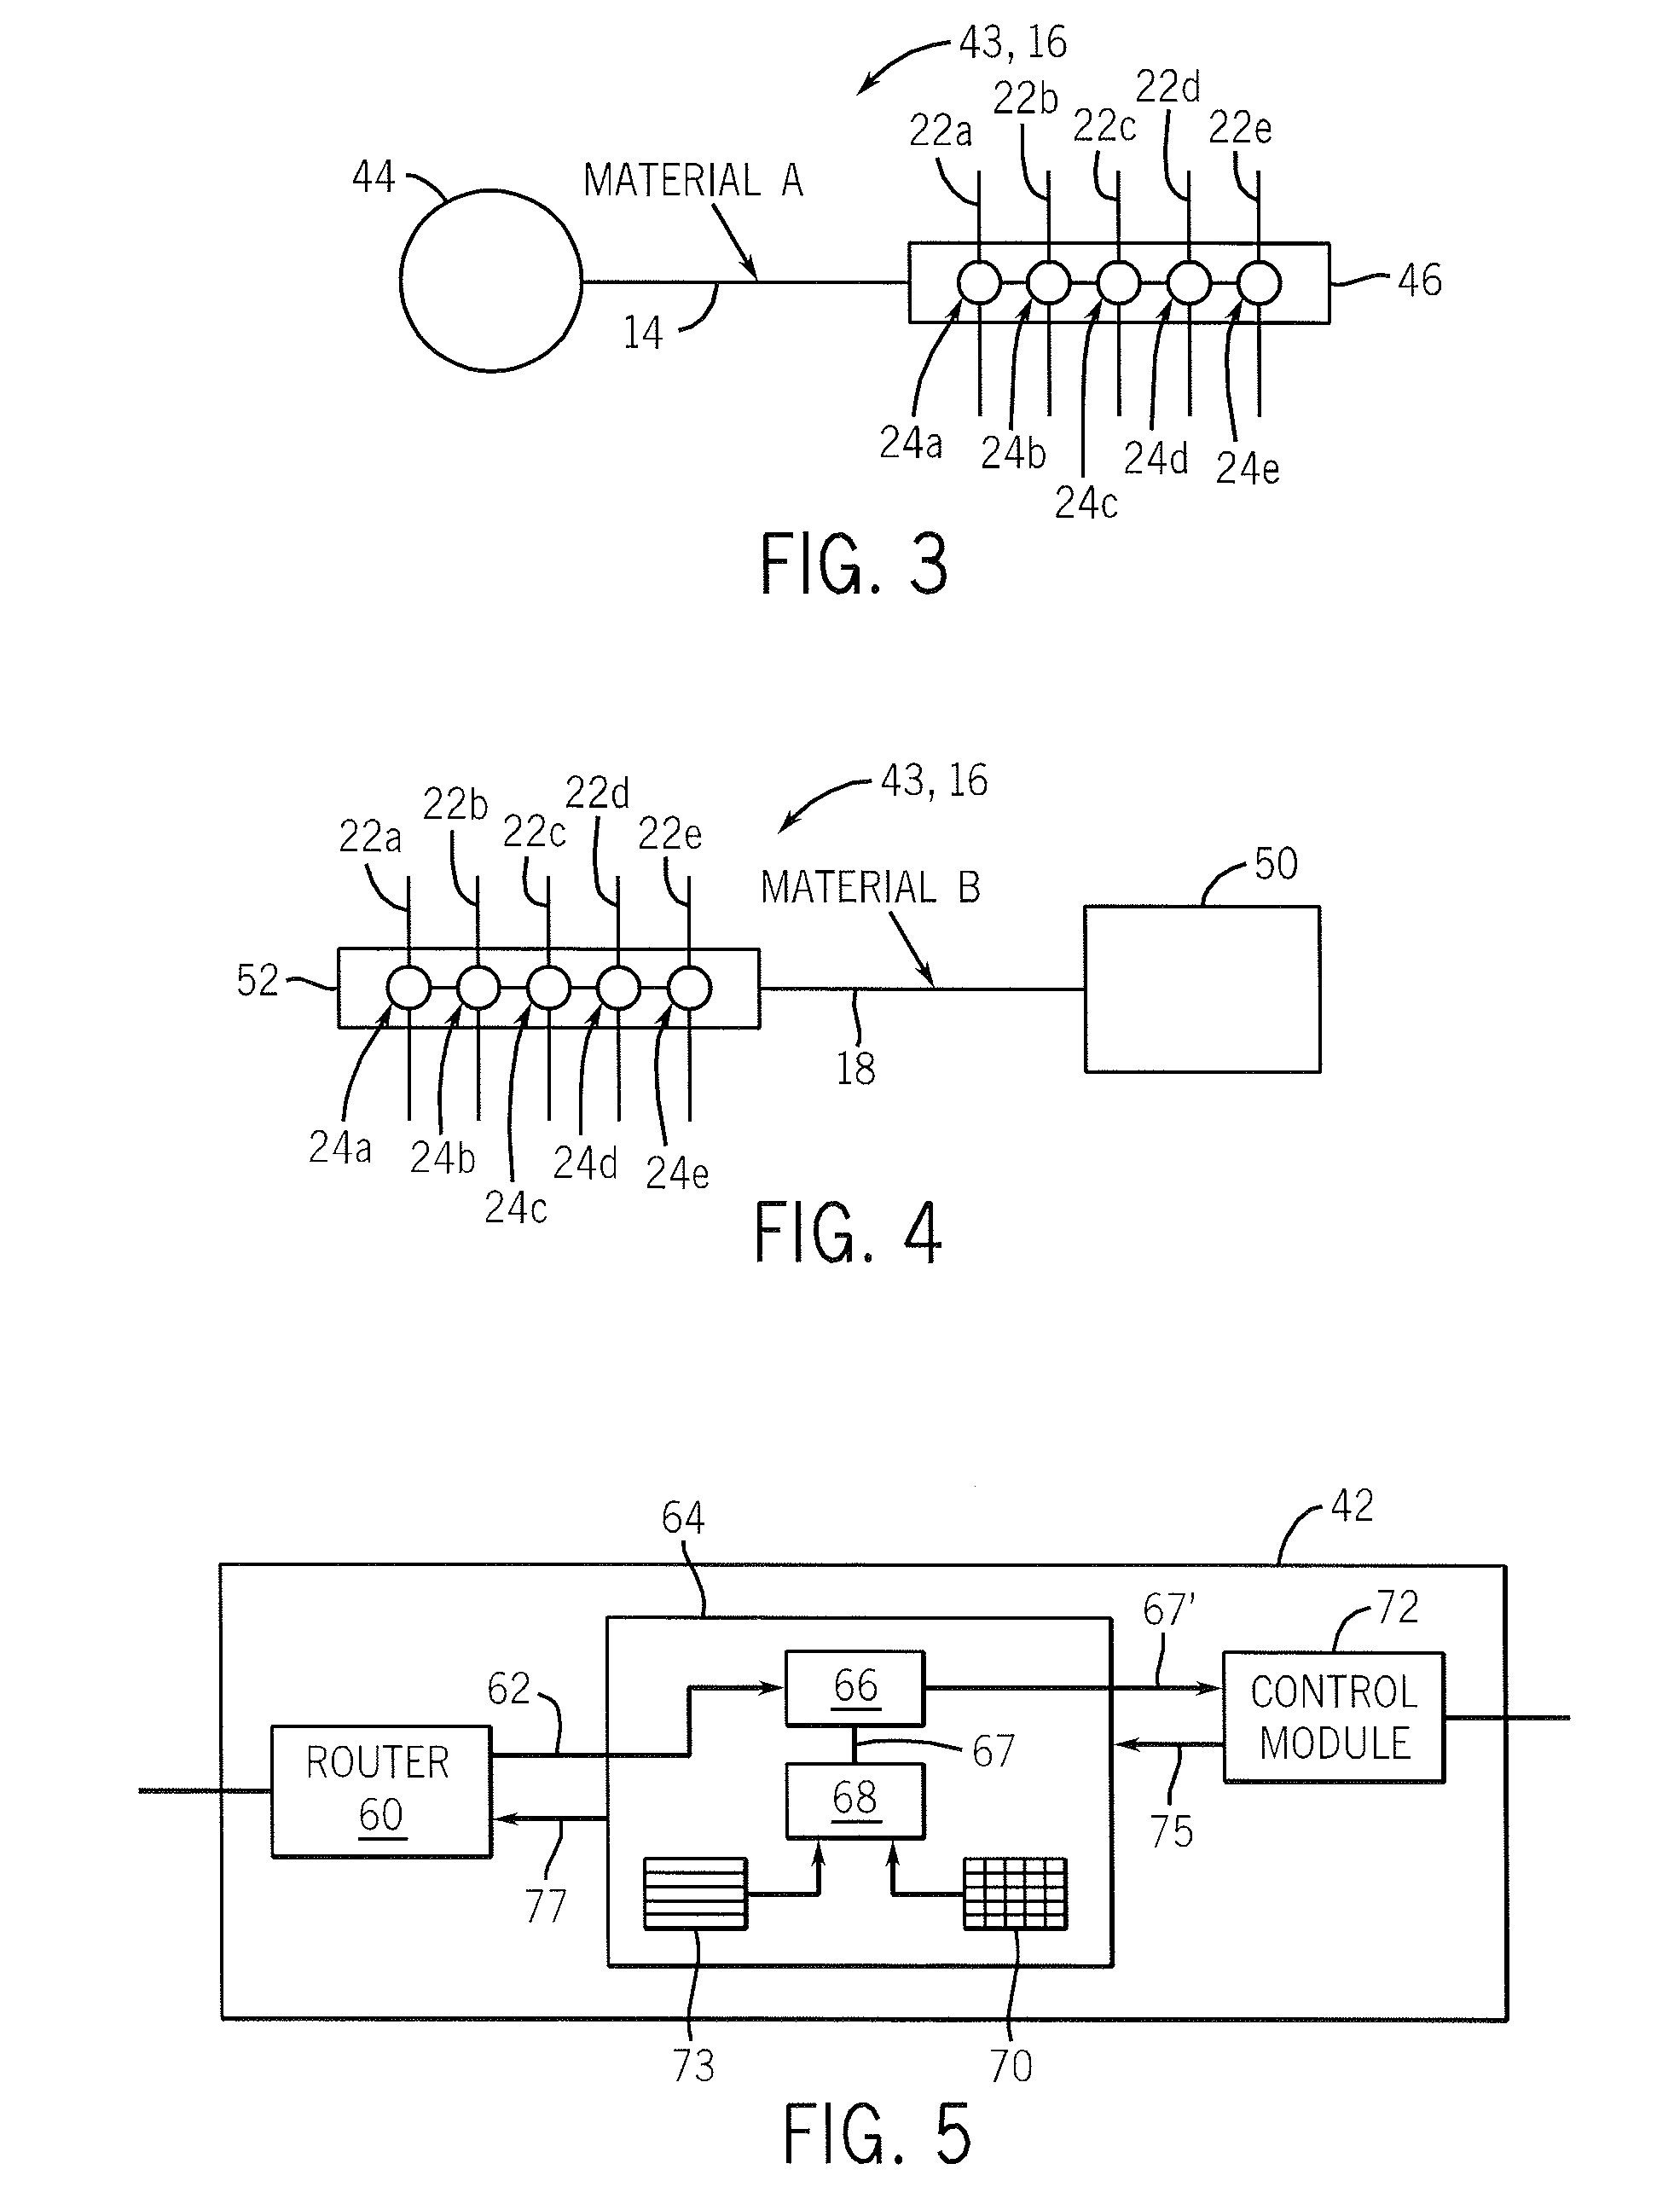 Material-sensitive routing for shared conduit systems